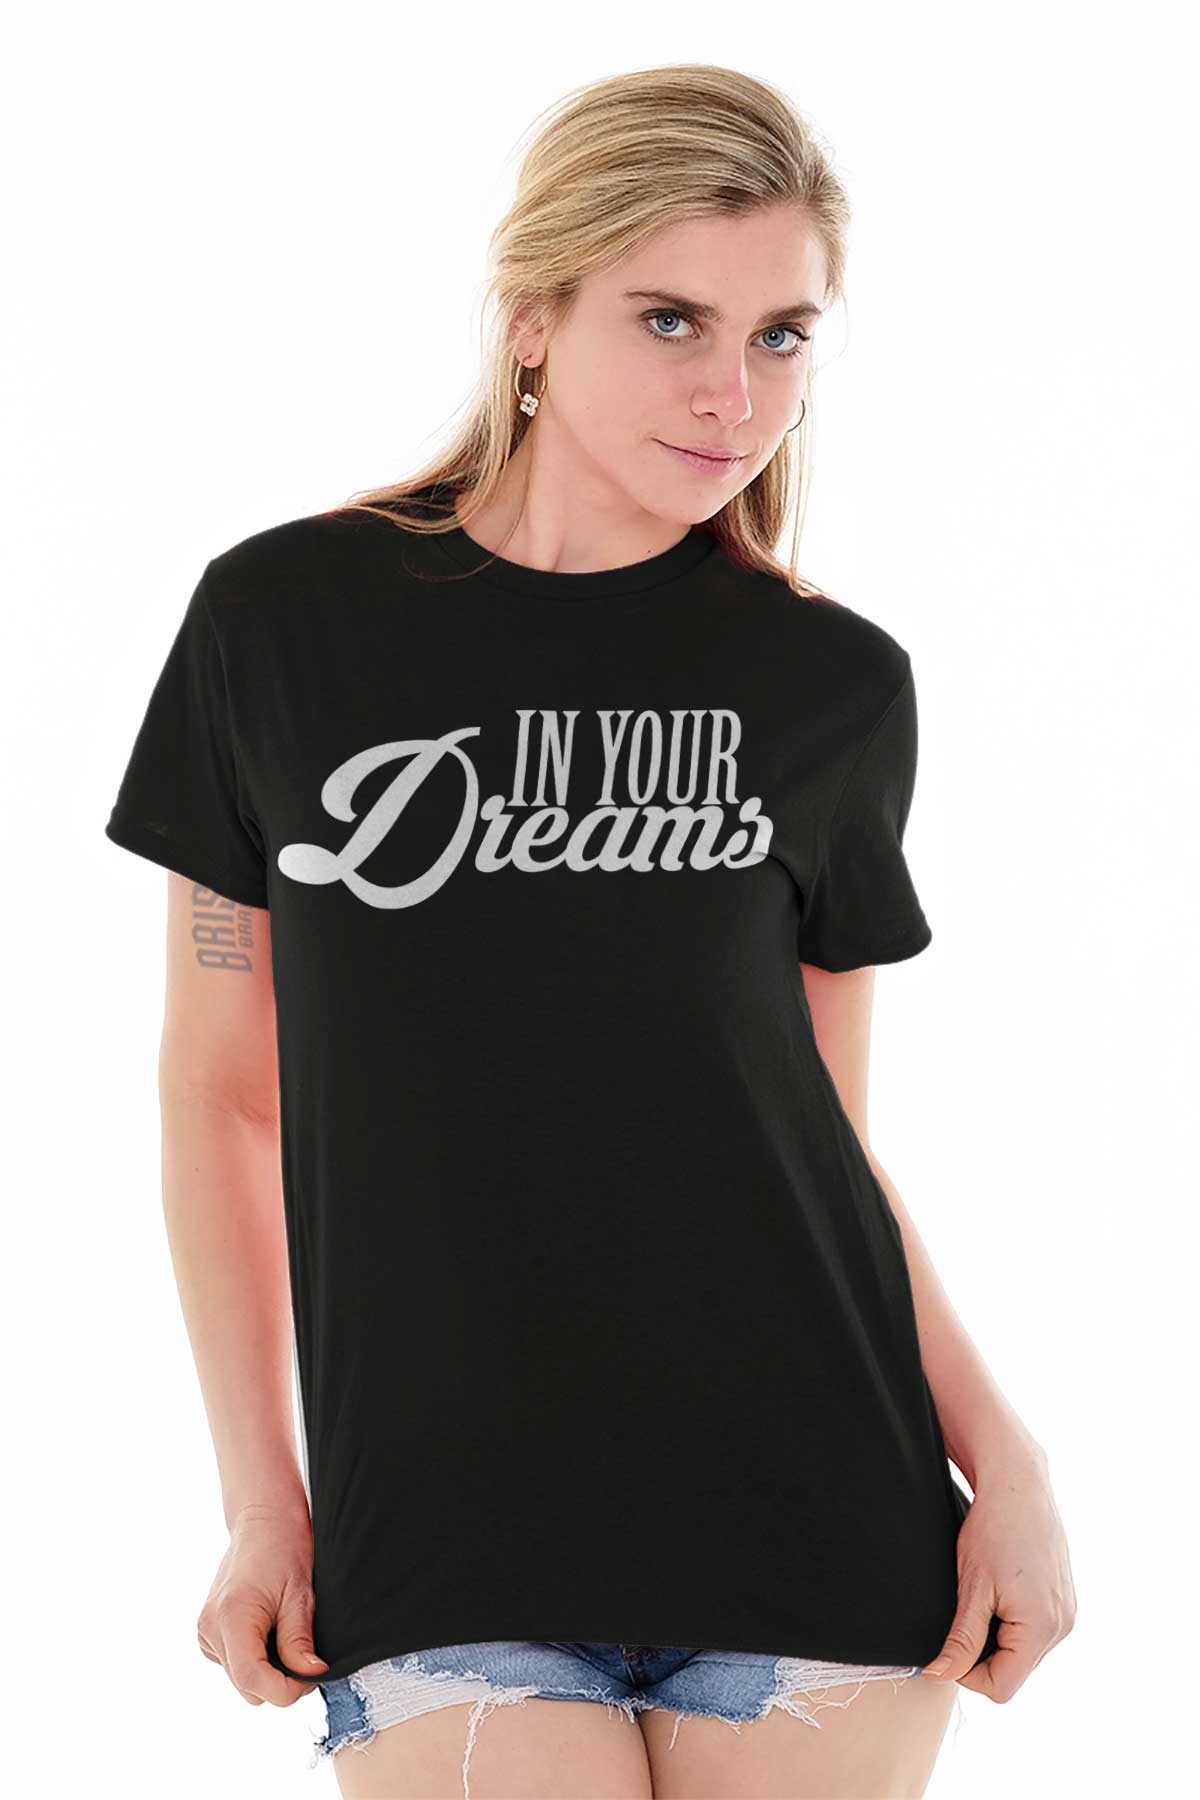 In Your Dreams Attitude Sassy Personality T-Shirts T Shirts Tees For ...